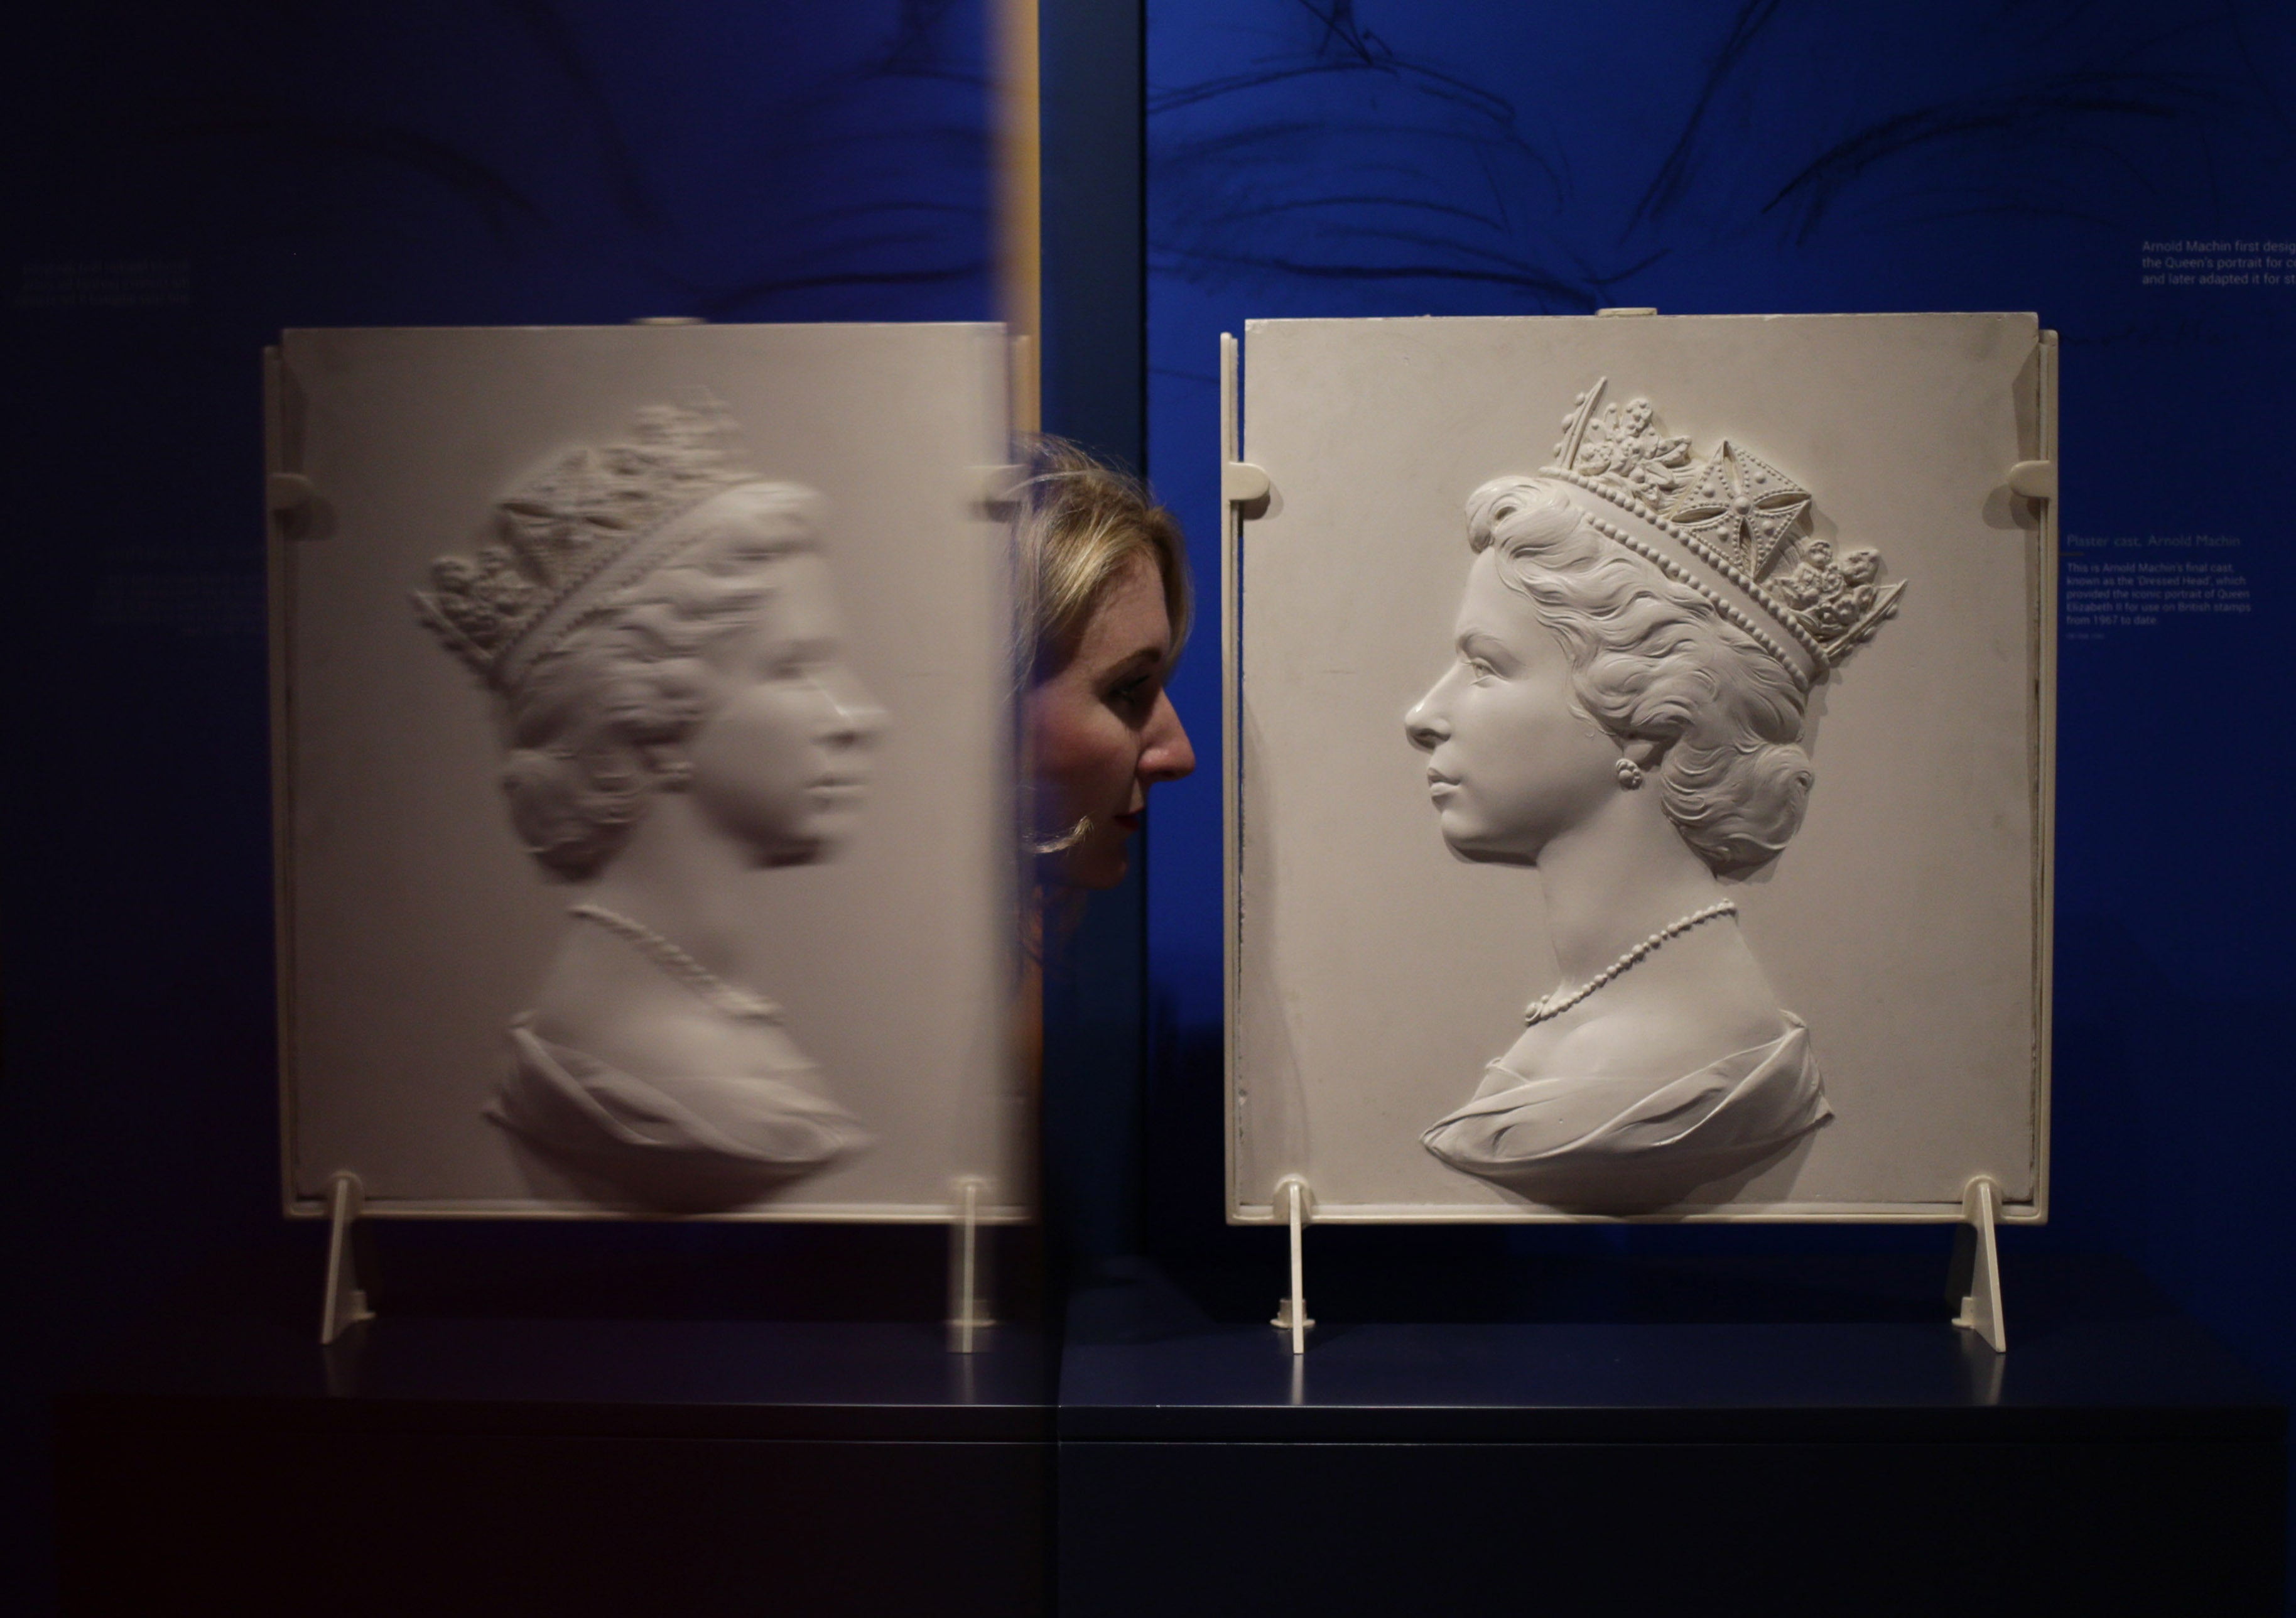 A final plaster cast known as the ‘Dressed Head’, by Arnold Machin, of Queen Elizabeth II, which provided the portrait for use on British stamps from 1967 to date, on display during a preview of the Postal Museum in London (Yui Mok/PA)